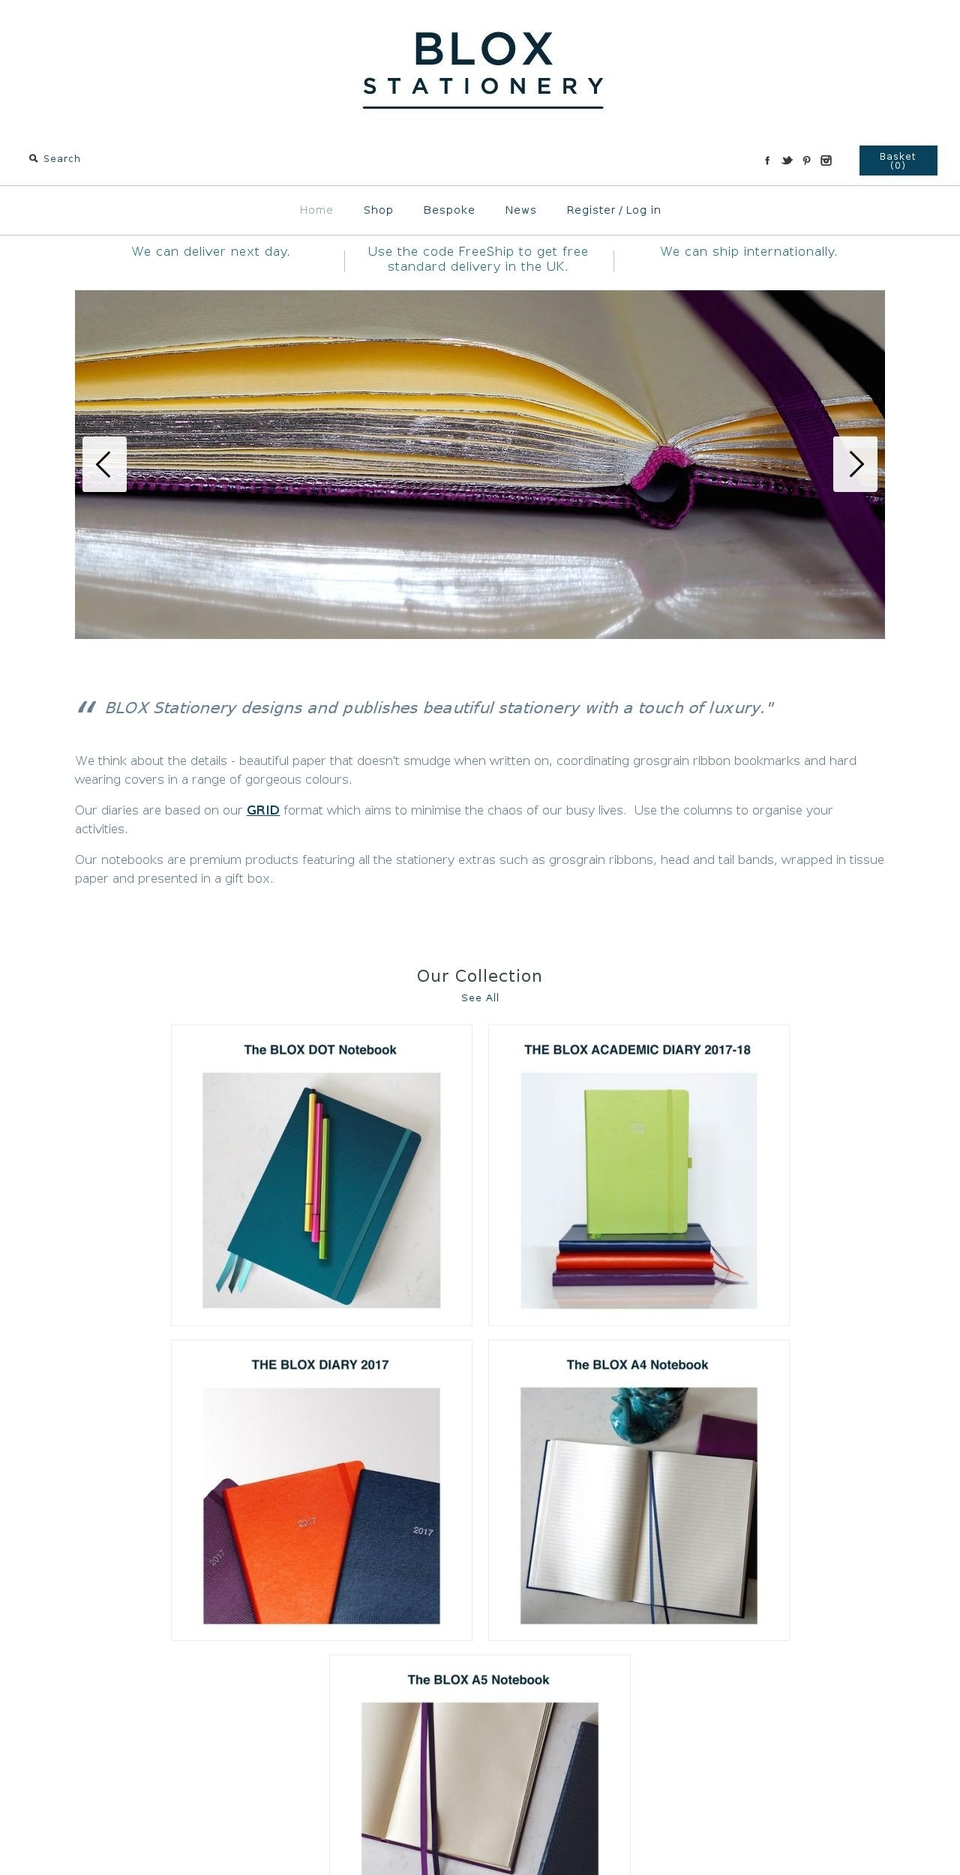 iOne Shopify theme site example bloxstationery.com